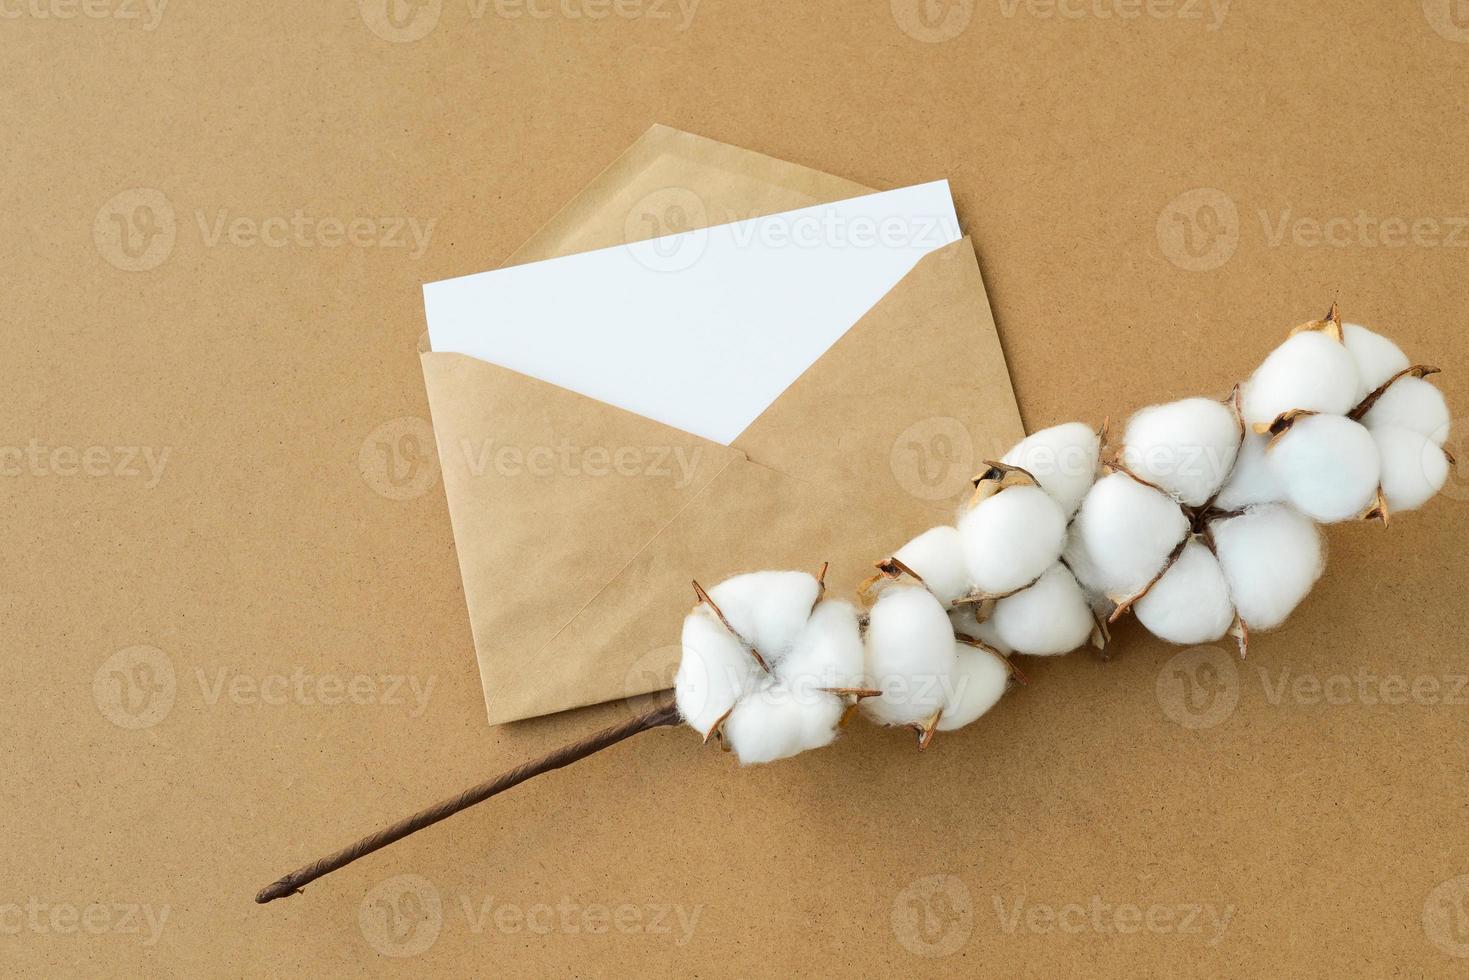 Blank card, vintage mail envelope on kraft paper background with cotton flowers branch, copy space photo